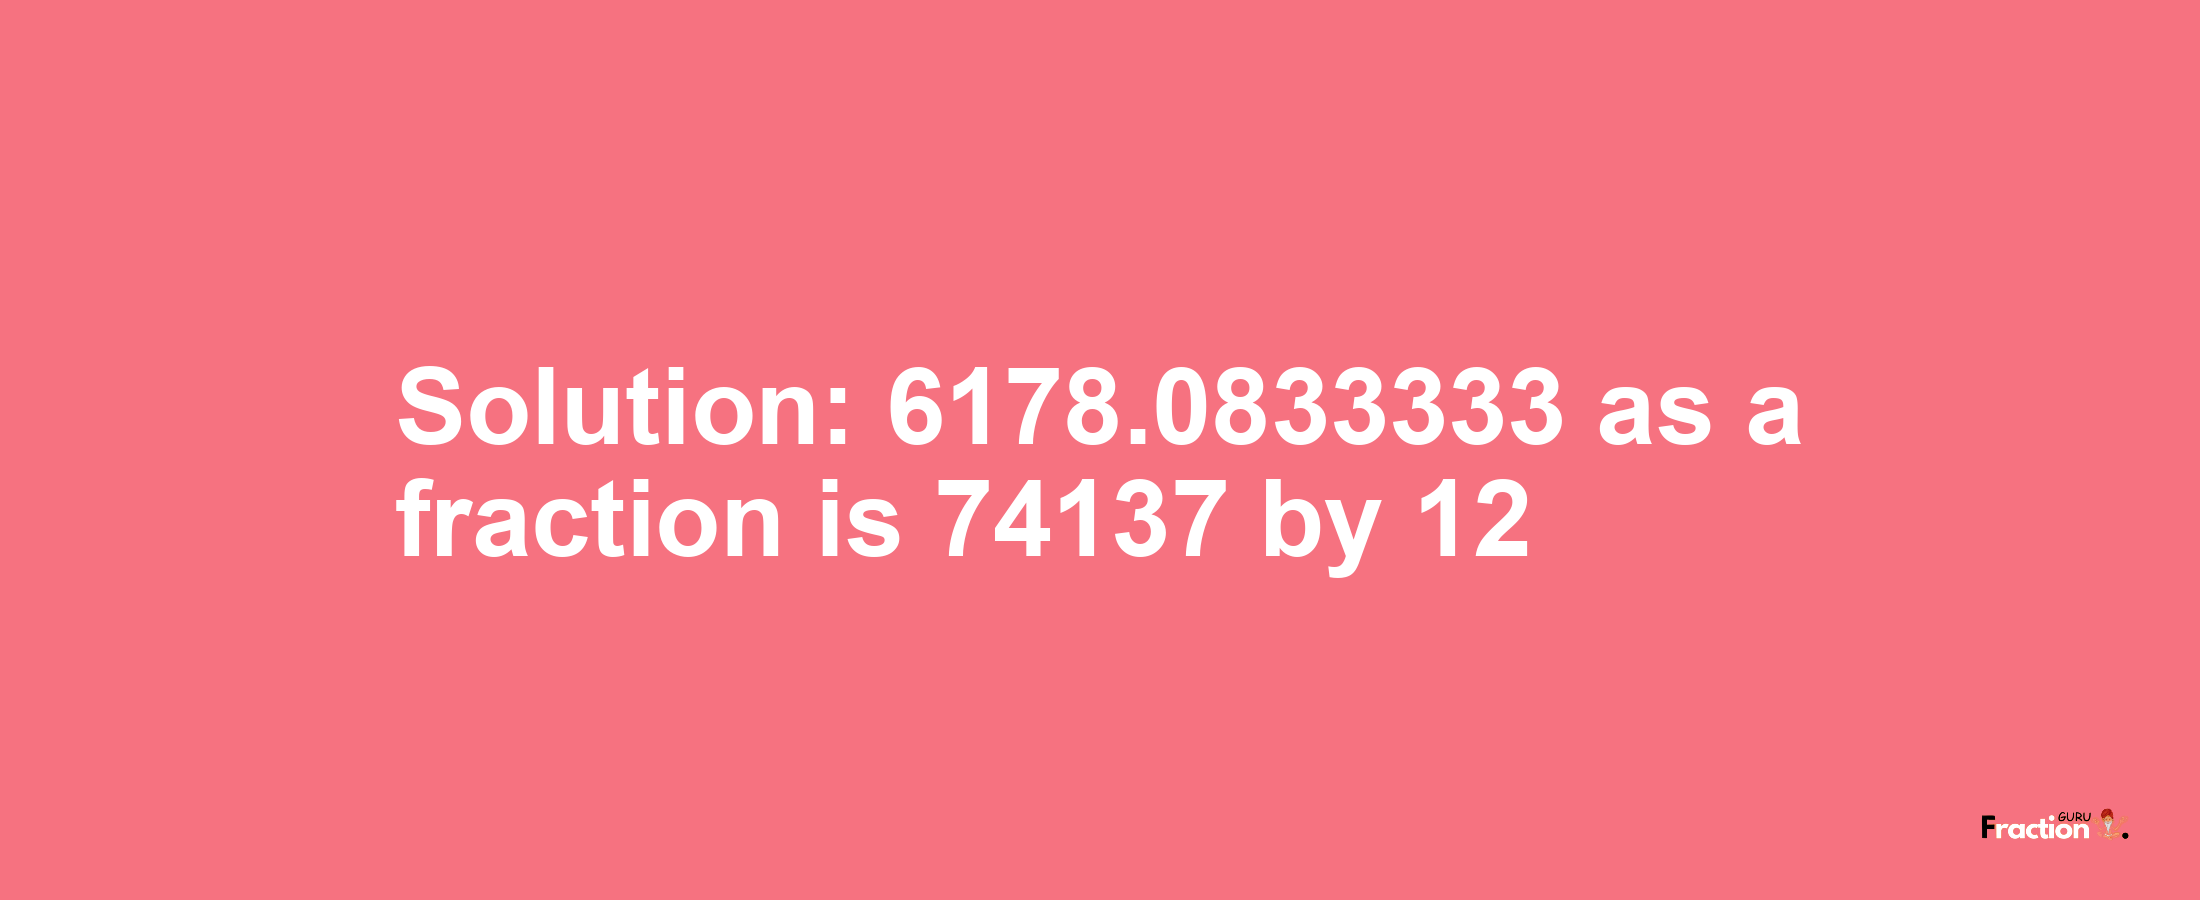 Solution:6178.0833333 as a fraction is 74137/12